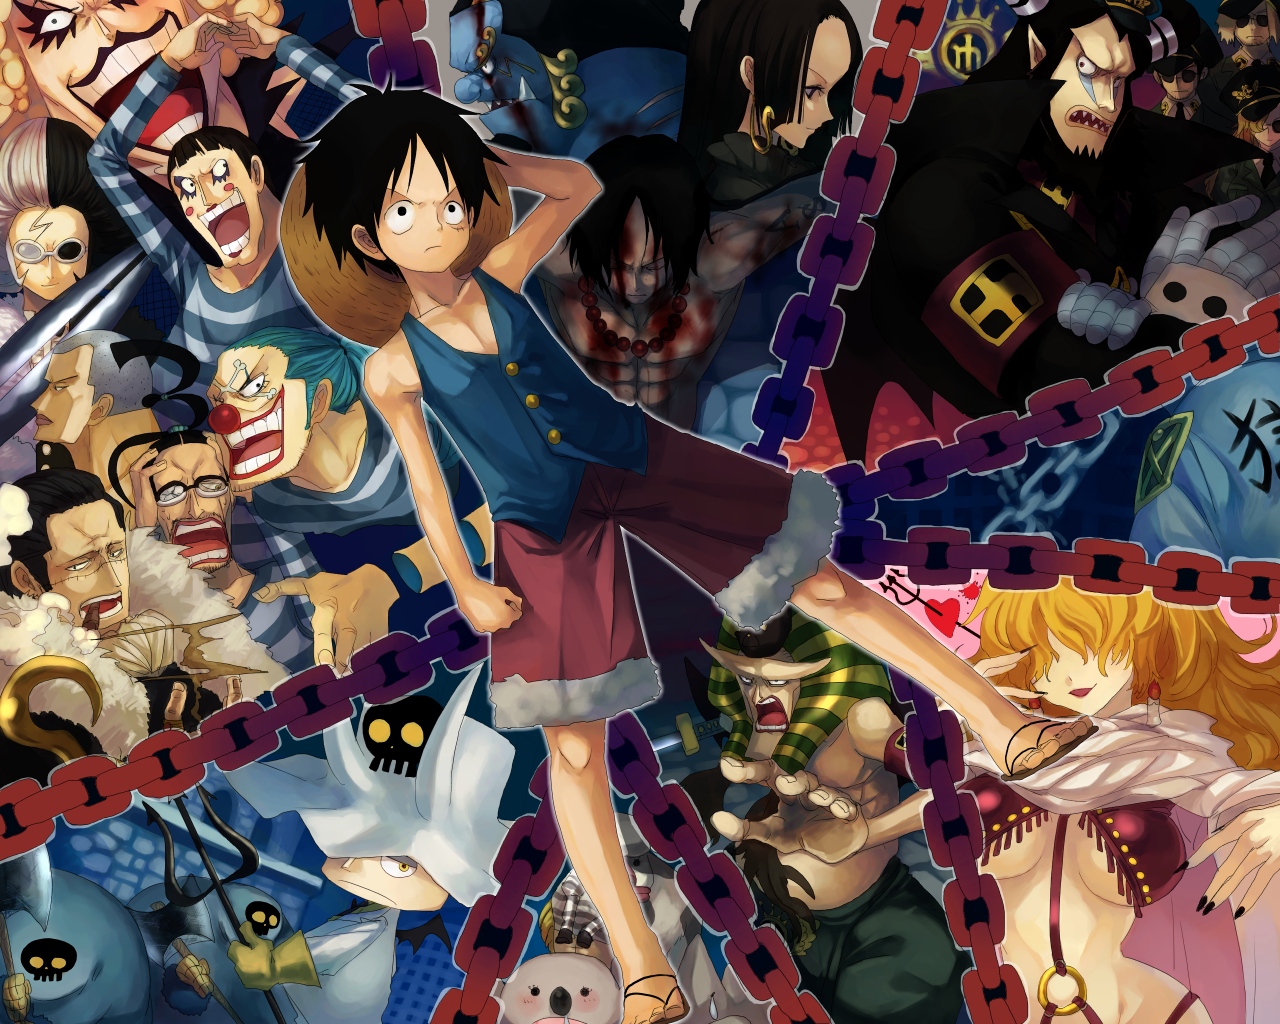 Anime One Piece 4k Ultra HD Wallpaper by RoninGFX